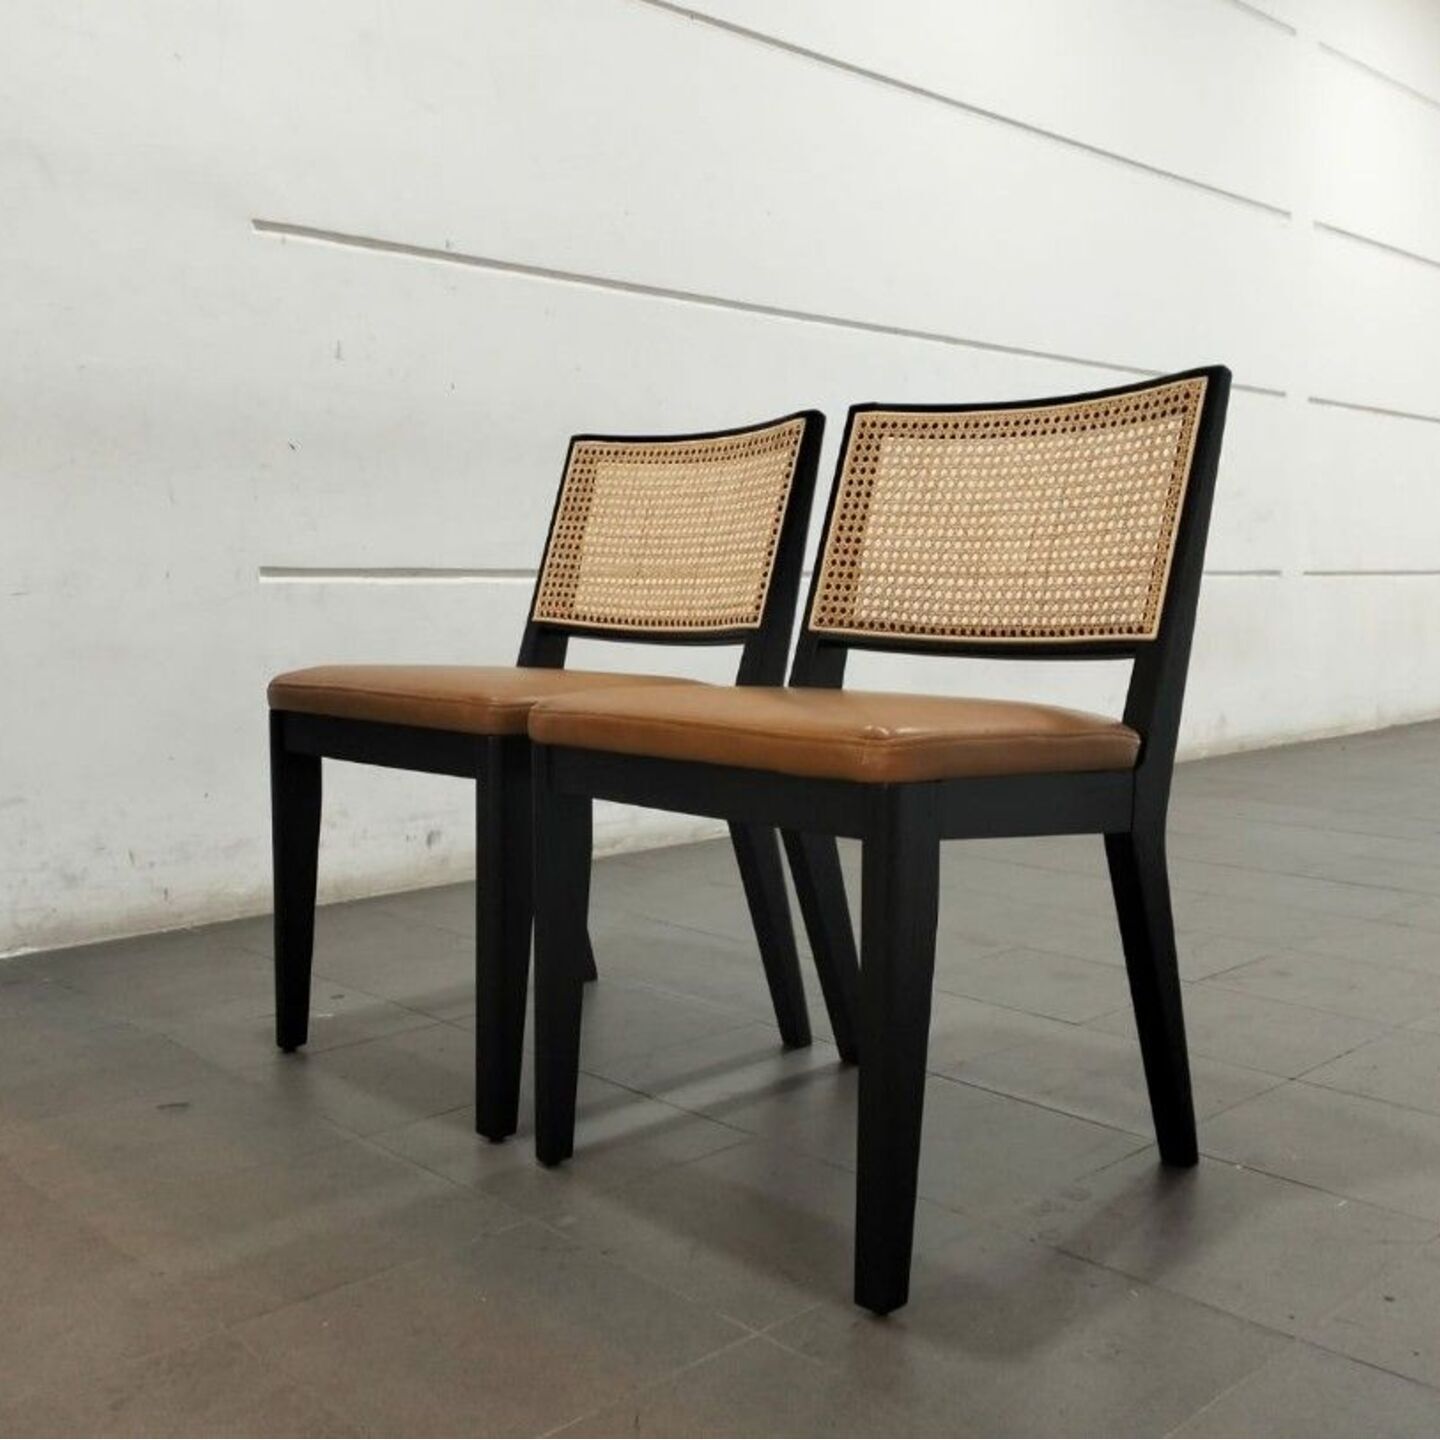 SANTI VALPO Cane and Leather Chairs (Set of 2)